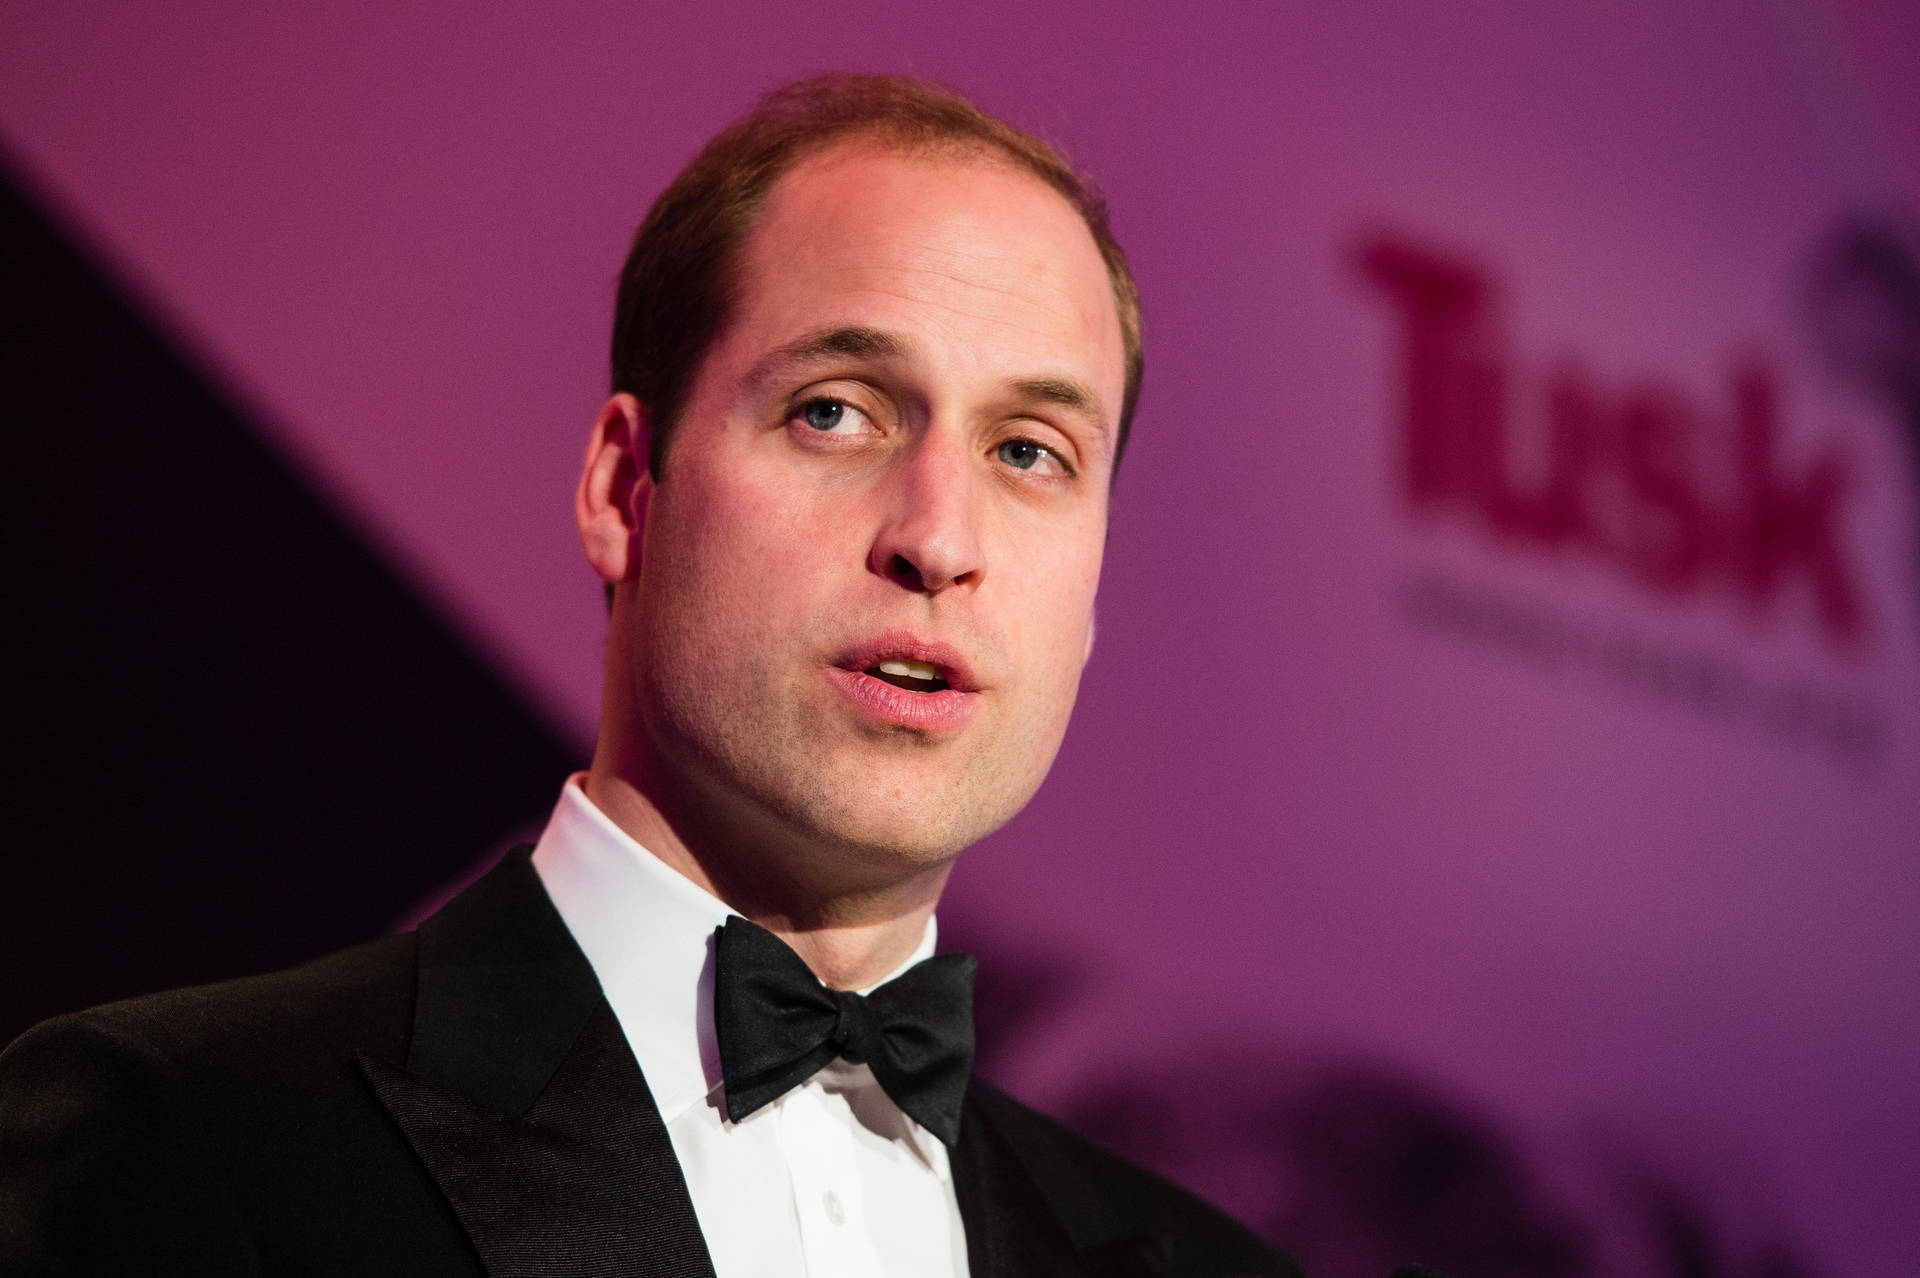 Prince William Dressed For A Formal Event